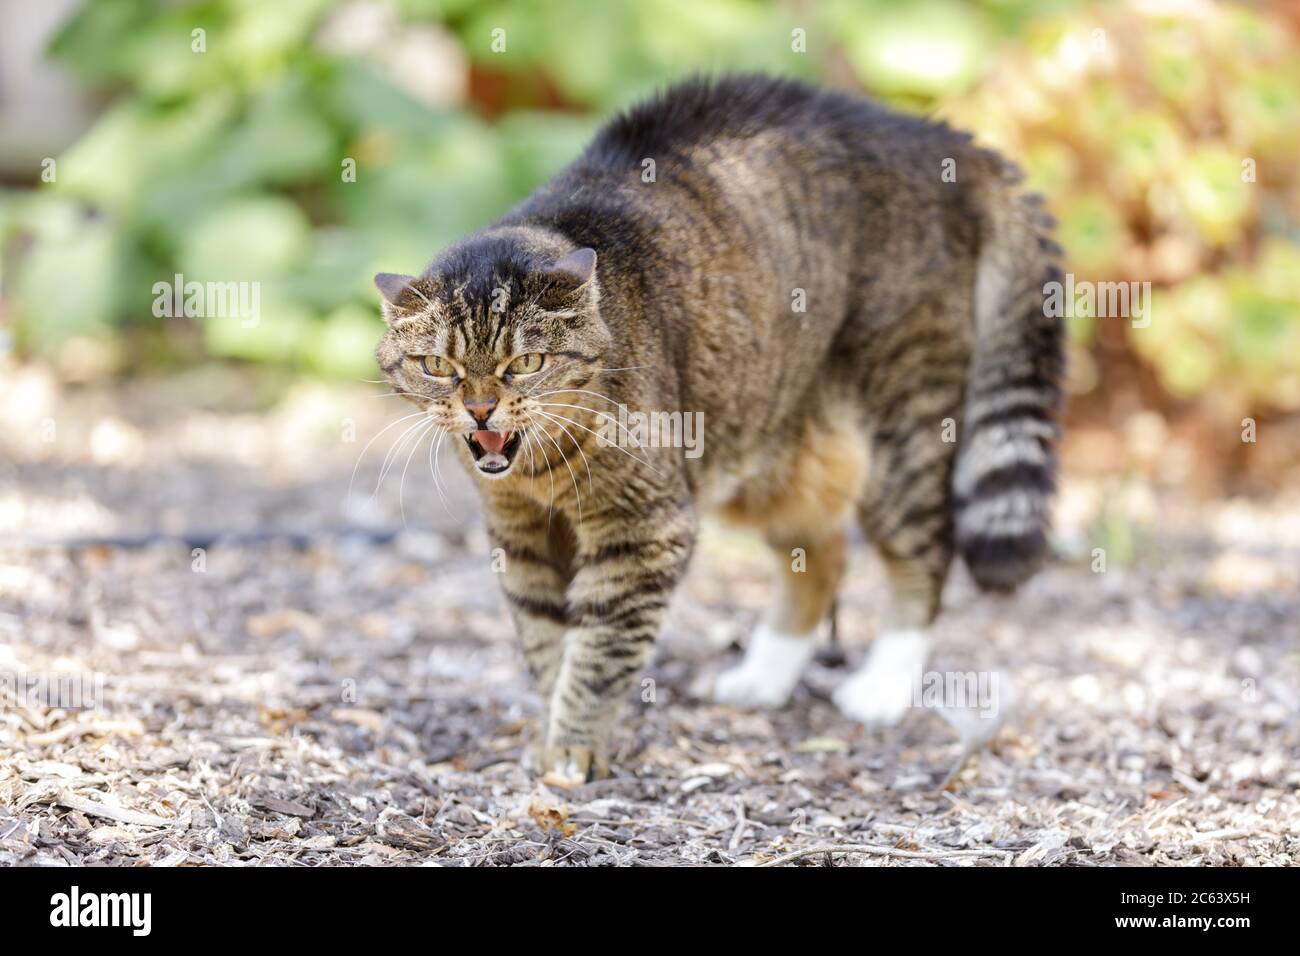 European Shorthair Cat Hissing and Arching Back with Hair Standing Up Stock Photo